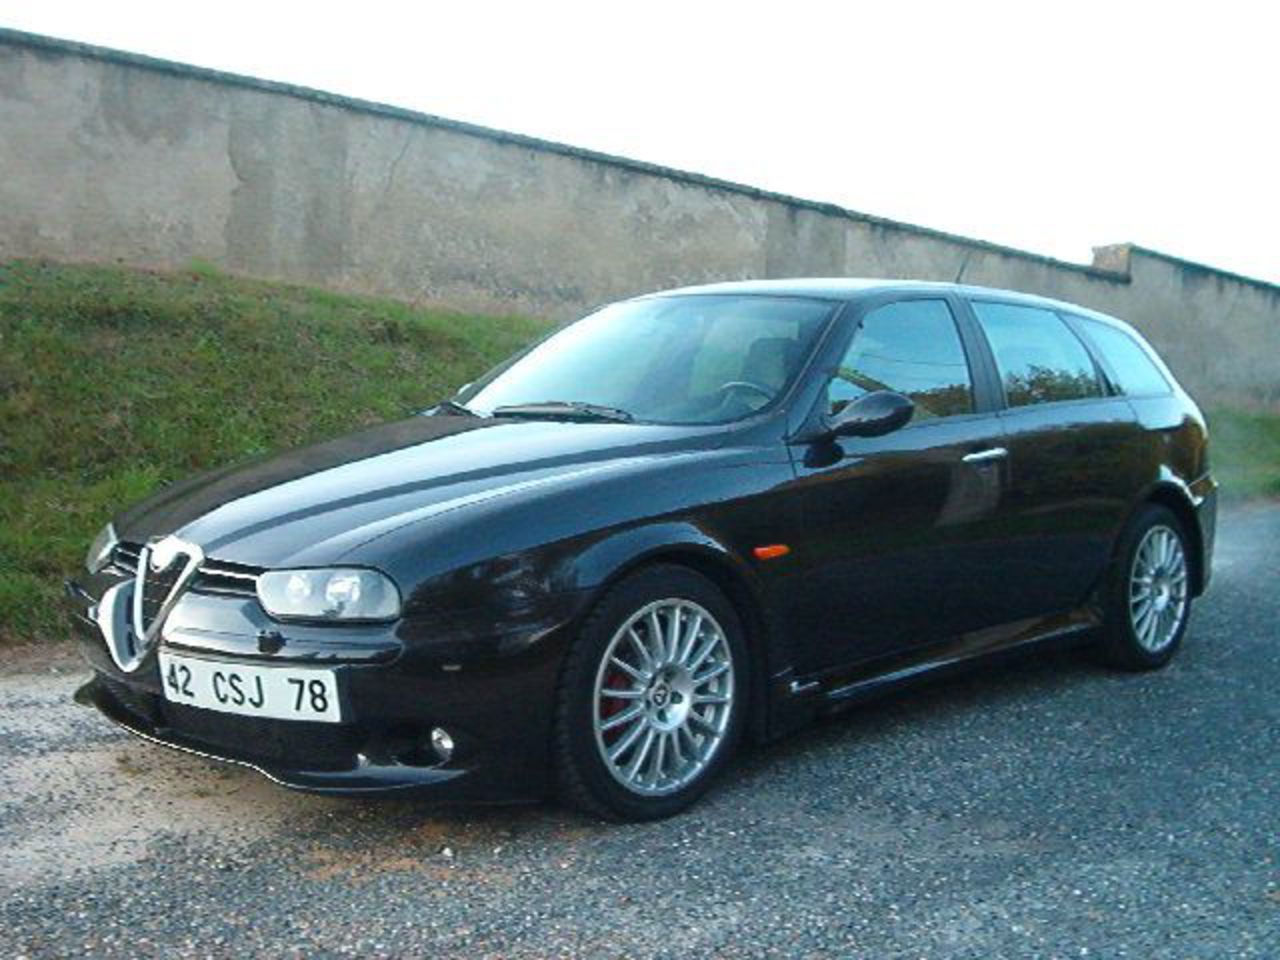 alfa romeo 156 related images,201 to 250 - Zuoda Images